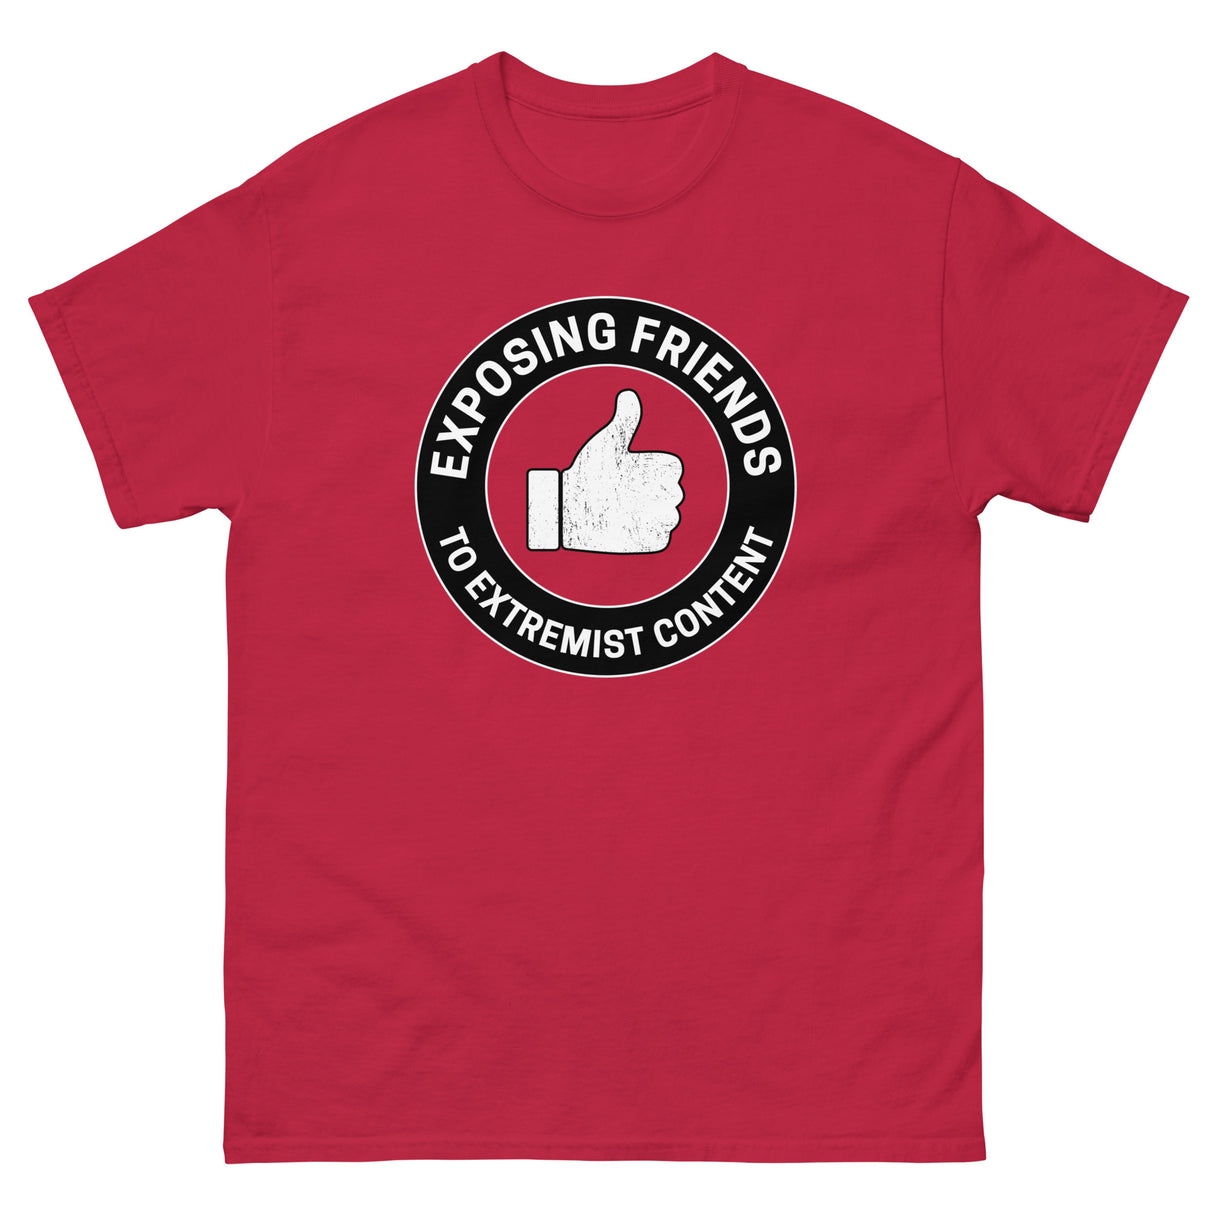 Exposing Friends to Extremist Content Heavy Cotton Shirt - Libertarian Country